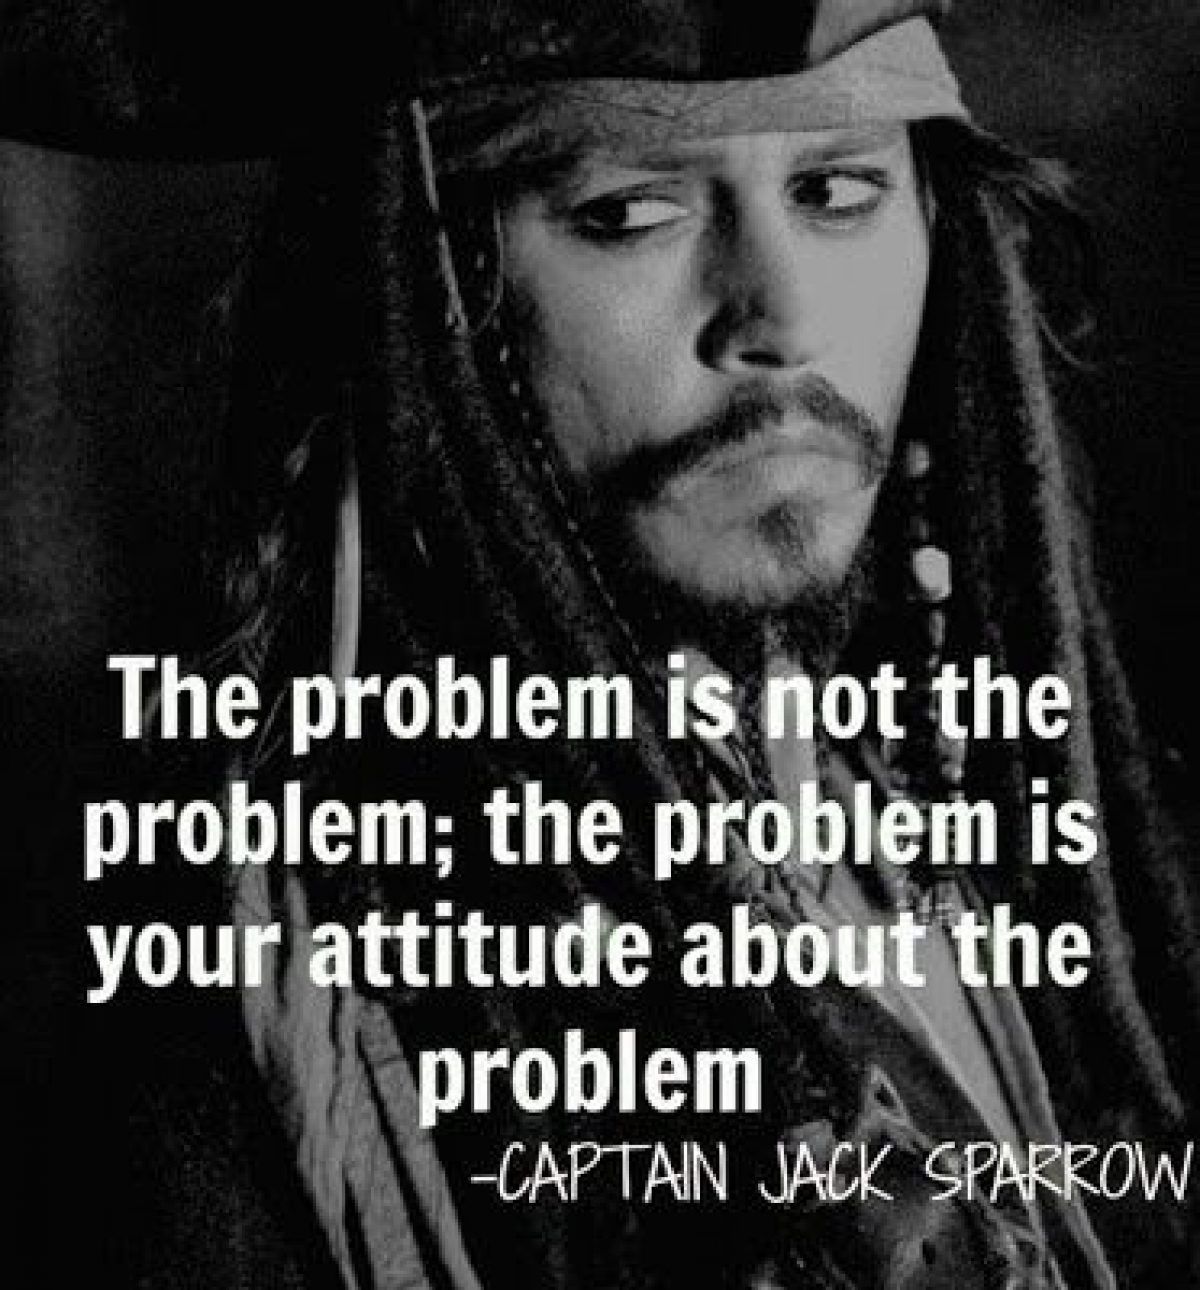 Most Amazing Captain Jack Sparrow Quotes of All Time